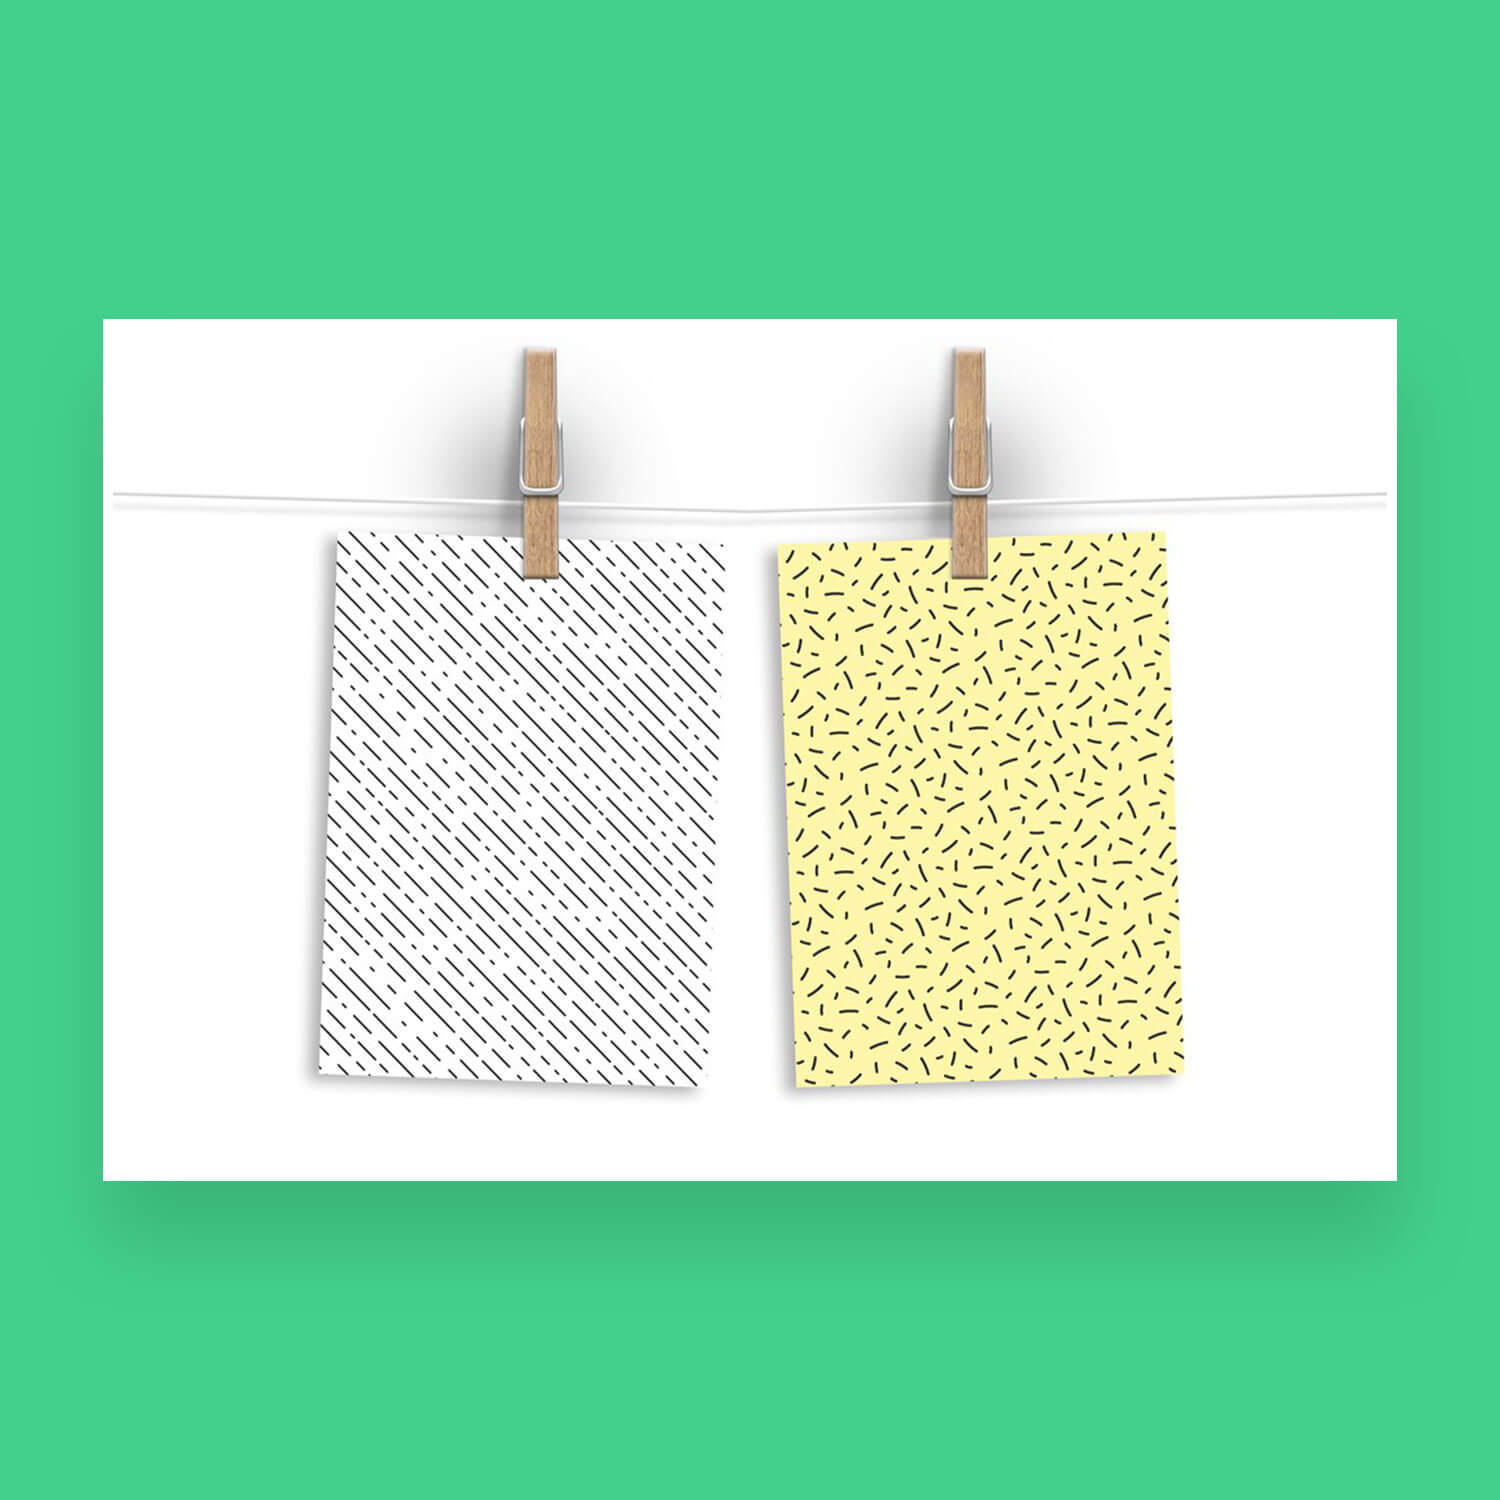 Two cards with samples of seamless patterns on a green background.